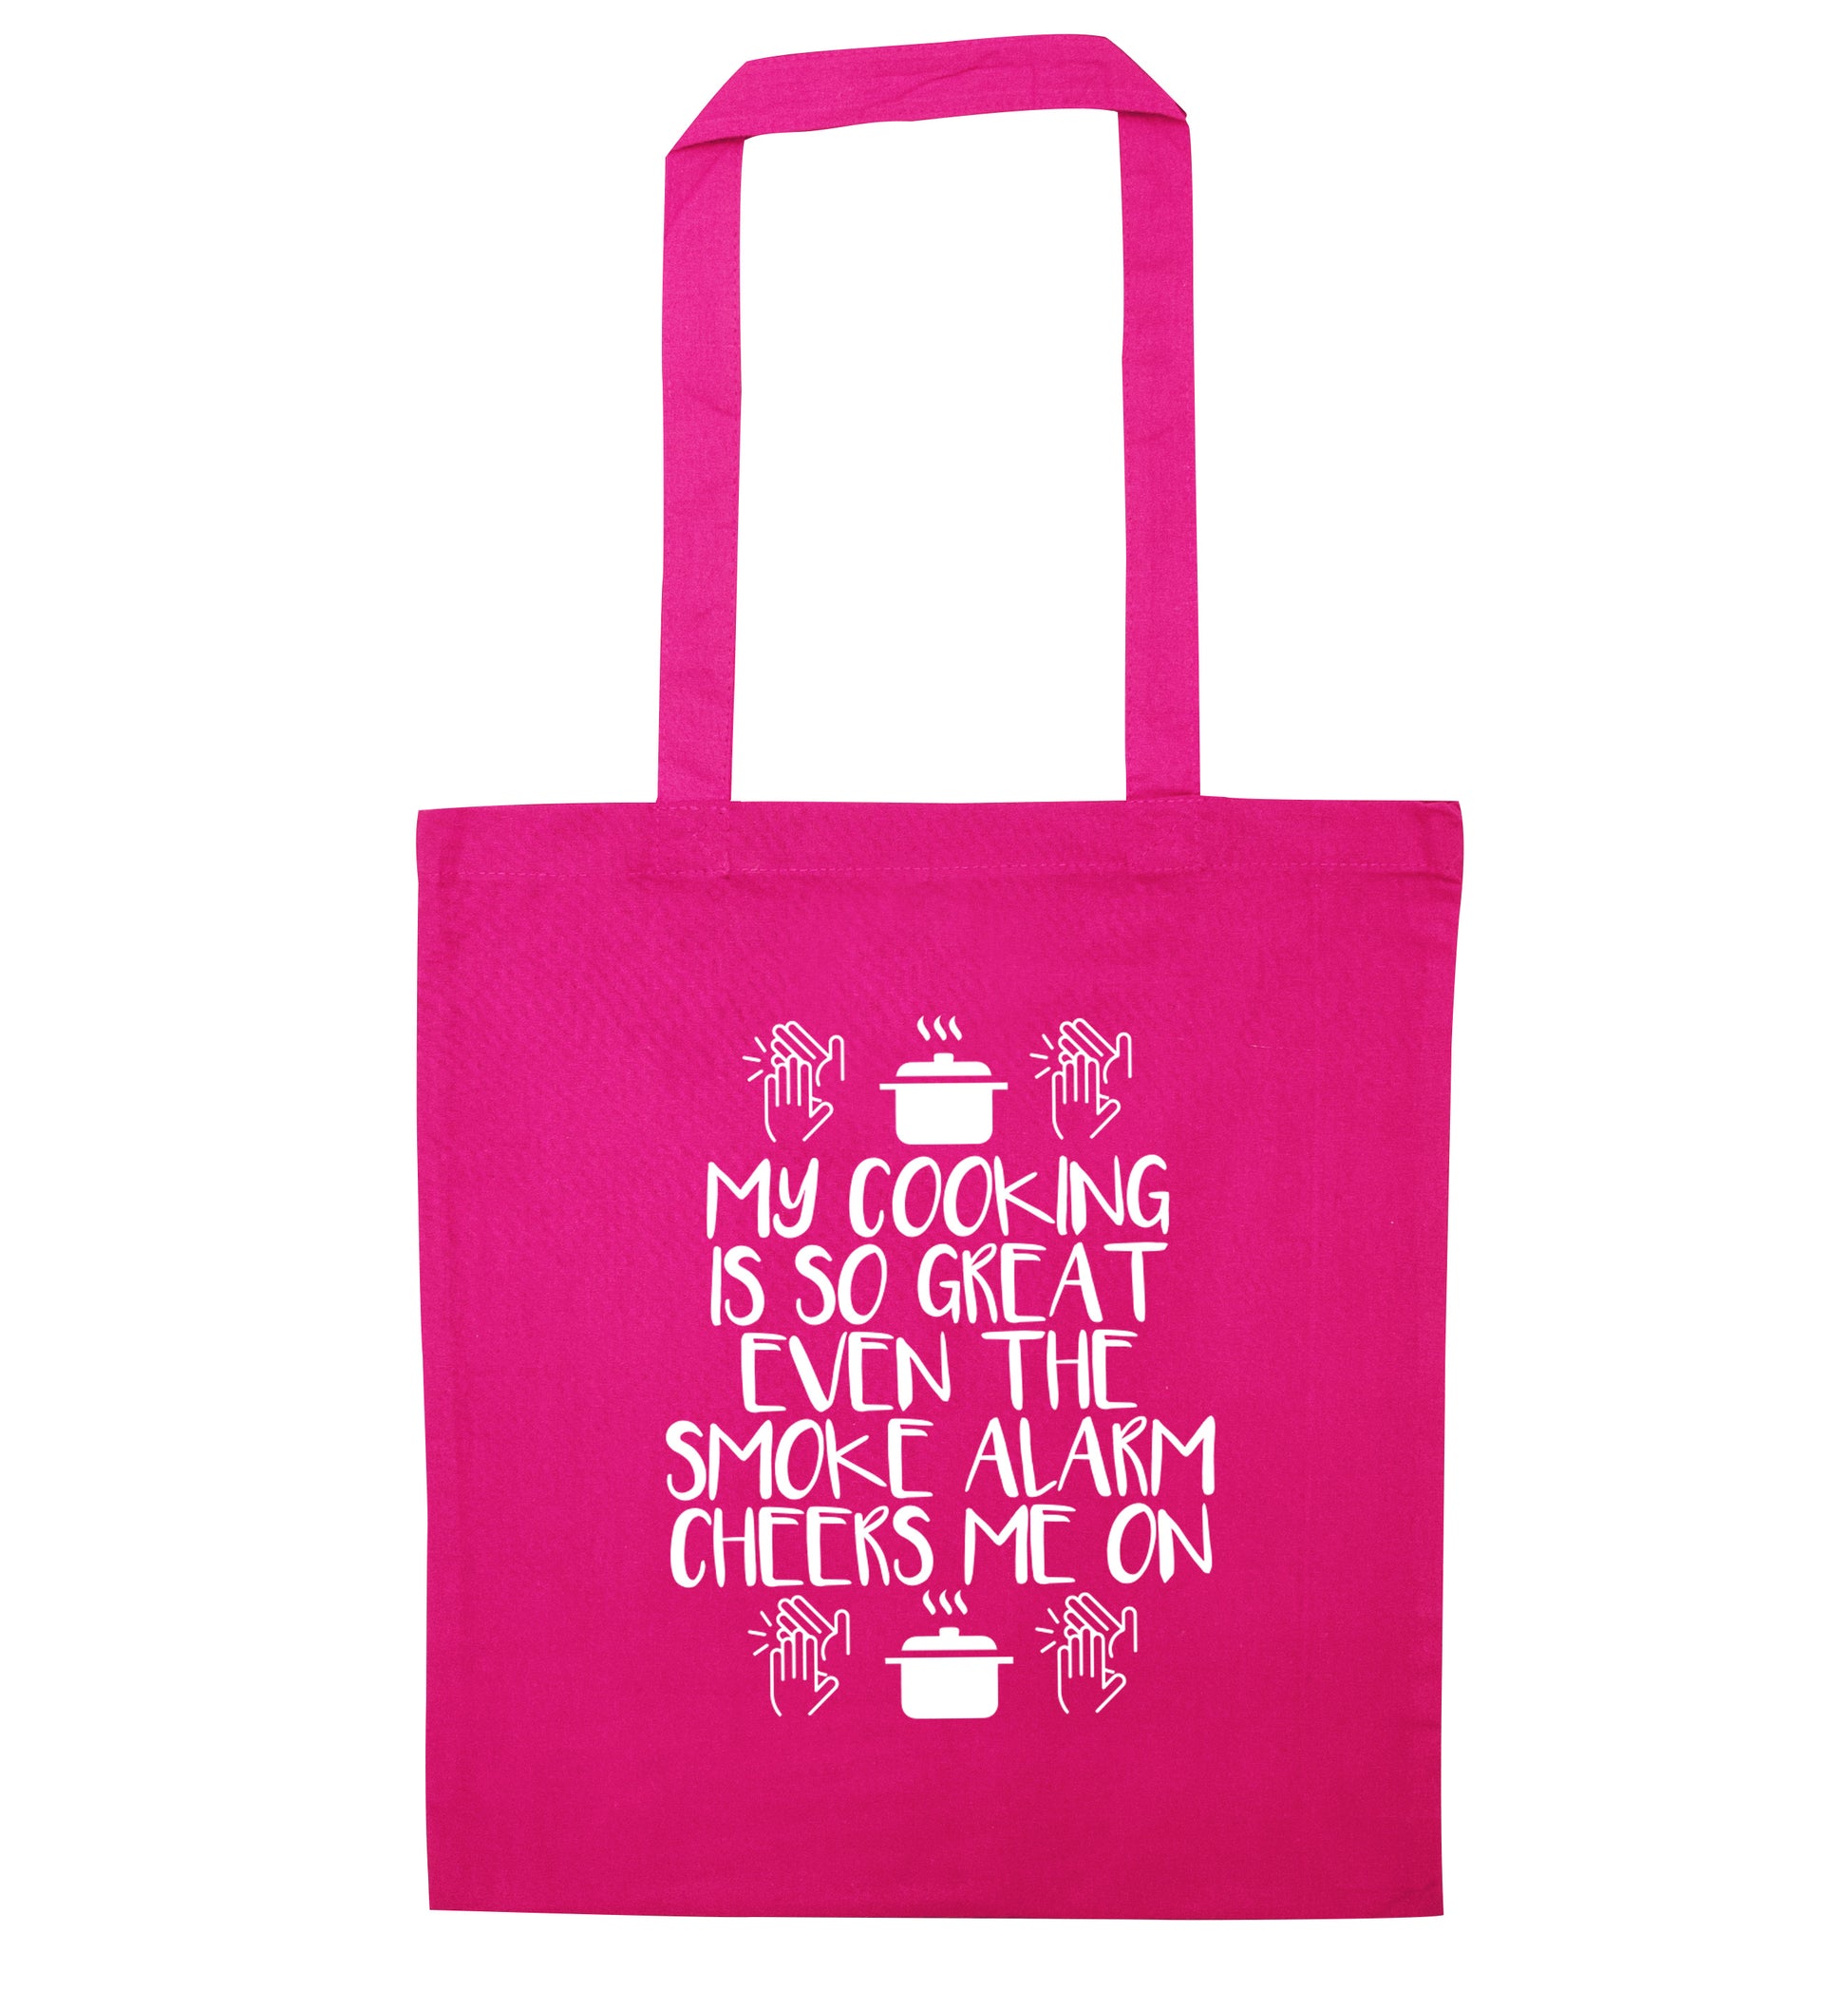 My cooking is so great even the smoke alarm cheers me on! pink tote bag